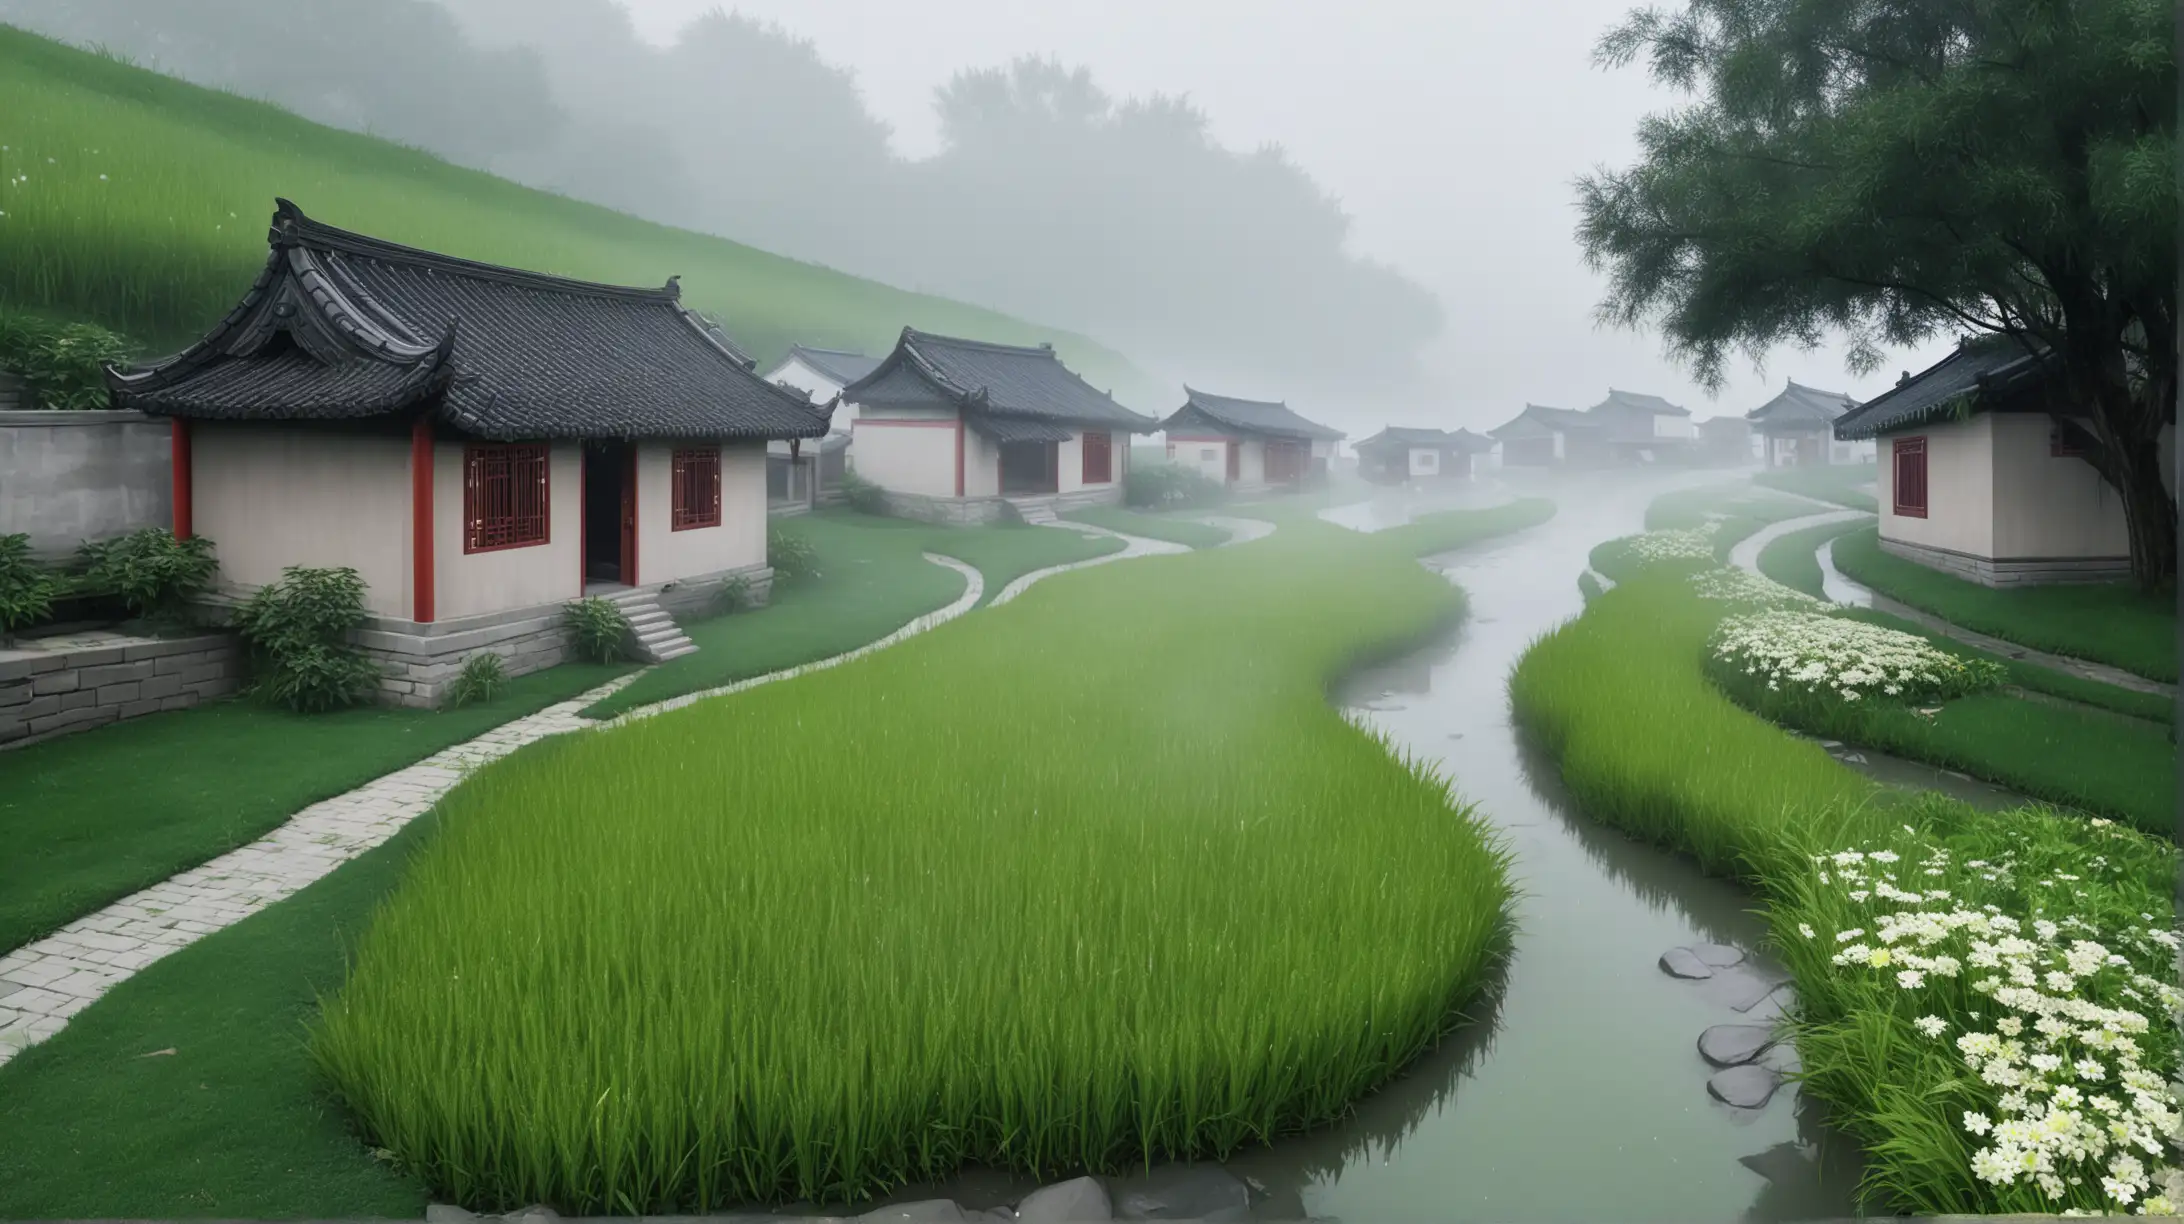 Tranquil Jiangnan Countryside Misty Rain Over Small House by the Riverbank